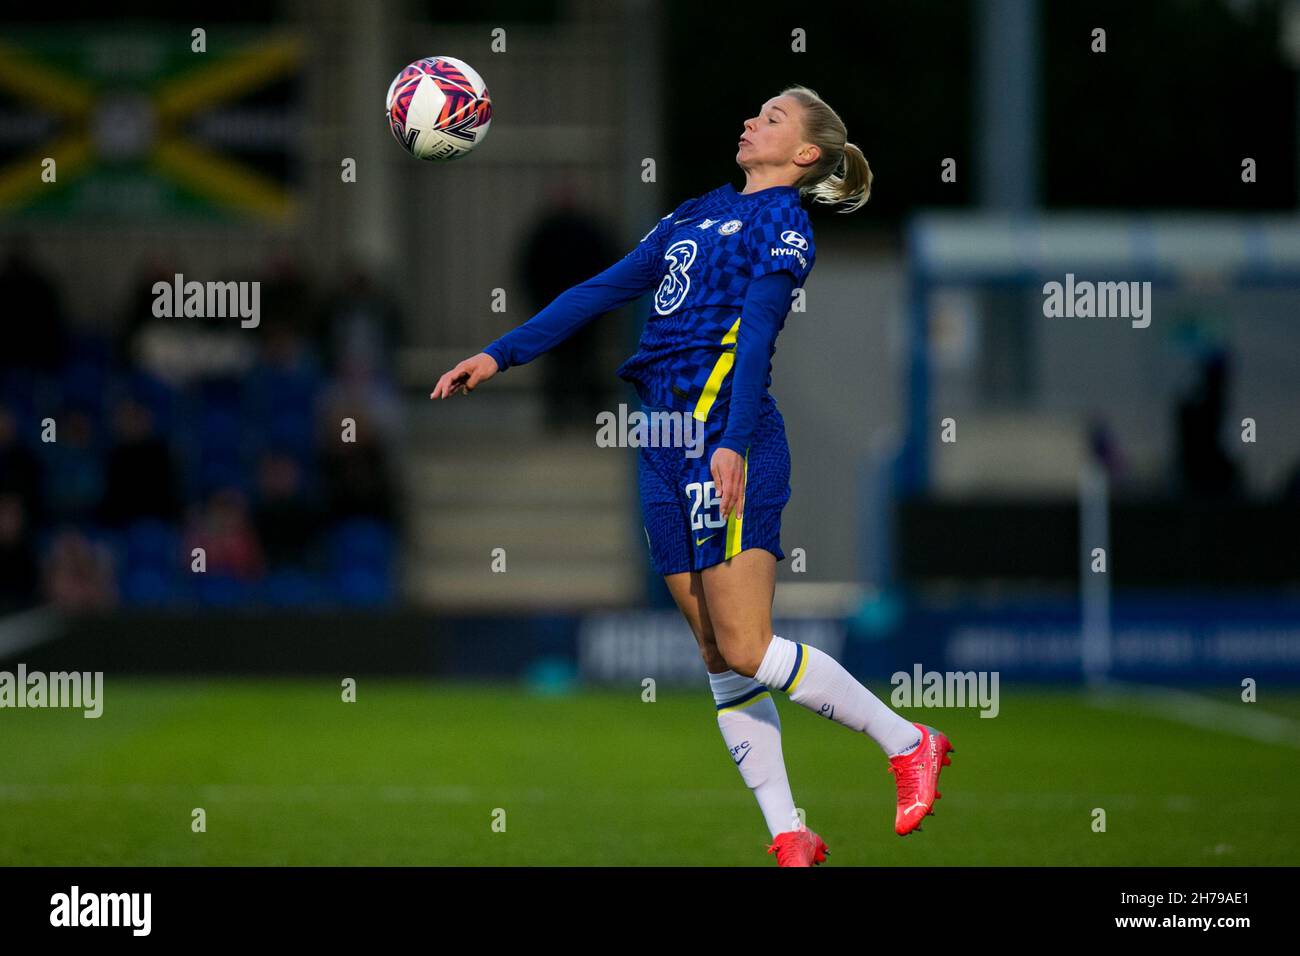 London, UK. 21st Nov, 2021. LONDON, UK. NOVEMBER 21ST : Jonna Andersson of Chelsea FC controls the ball during the 2021-22 FA Womens Superleague fixture between Chelsea FC and Birmingham City at Kingsmeadow. Credit: Federico Guerra Morán/Alamy Live News Stock Photo